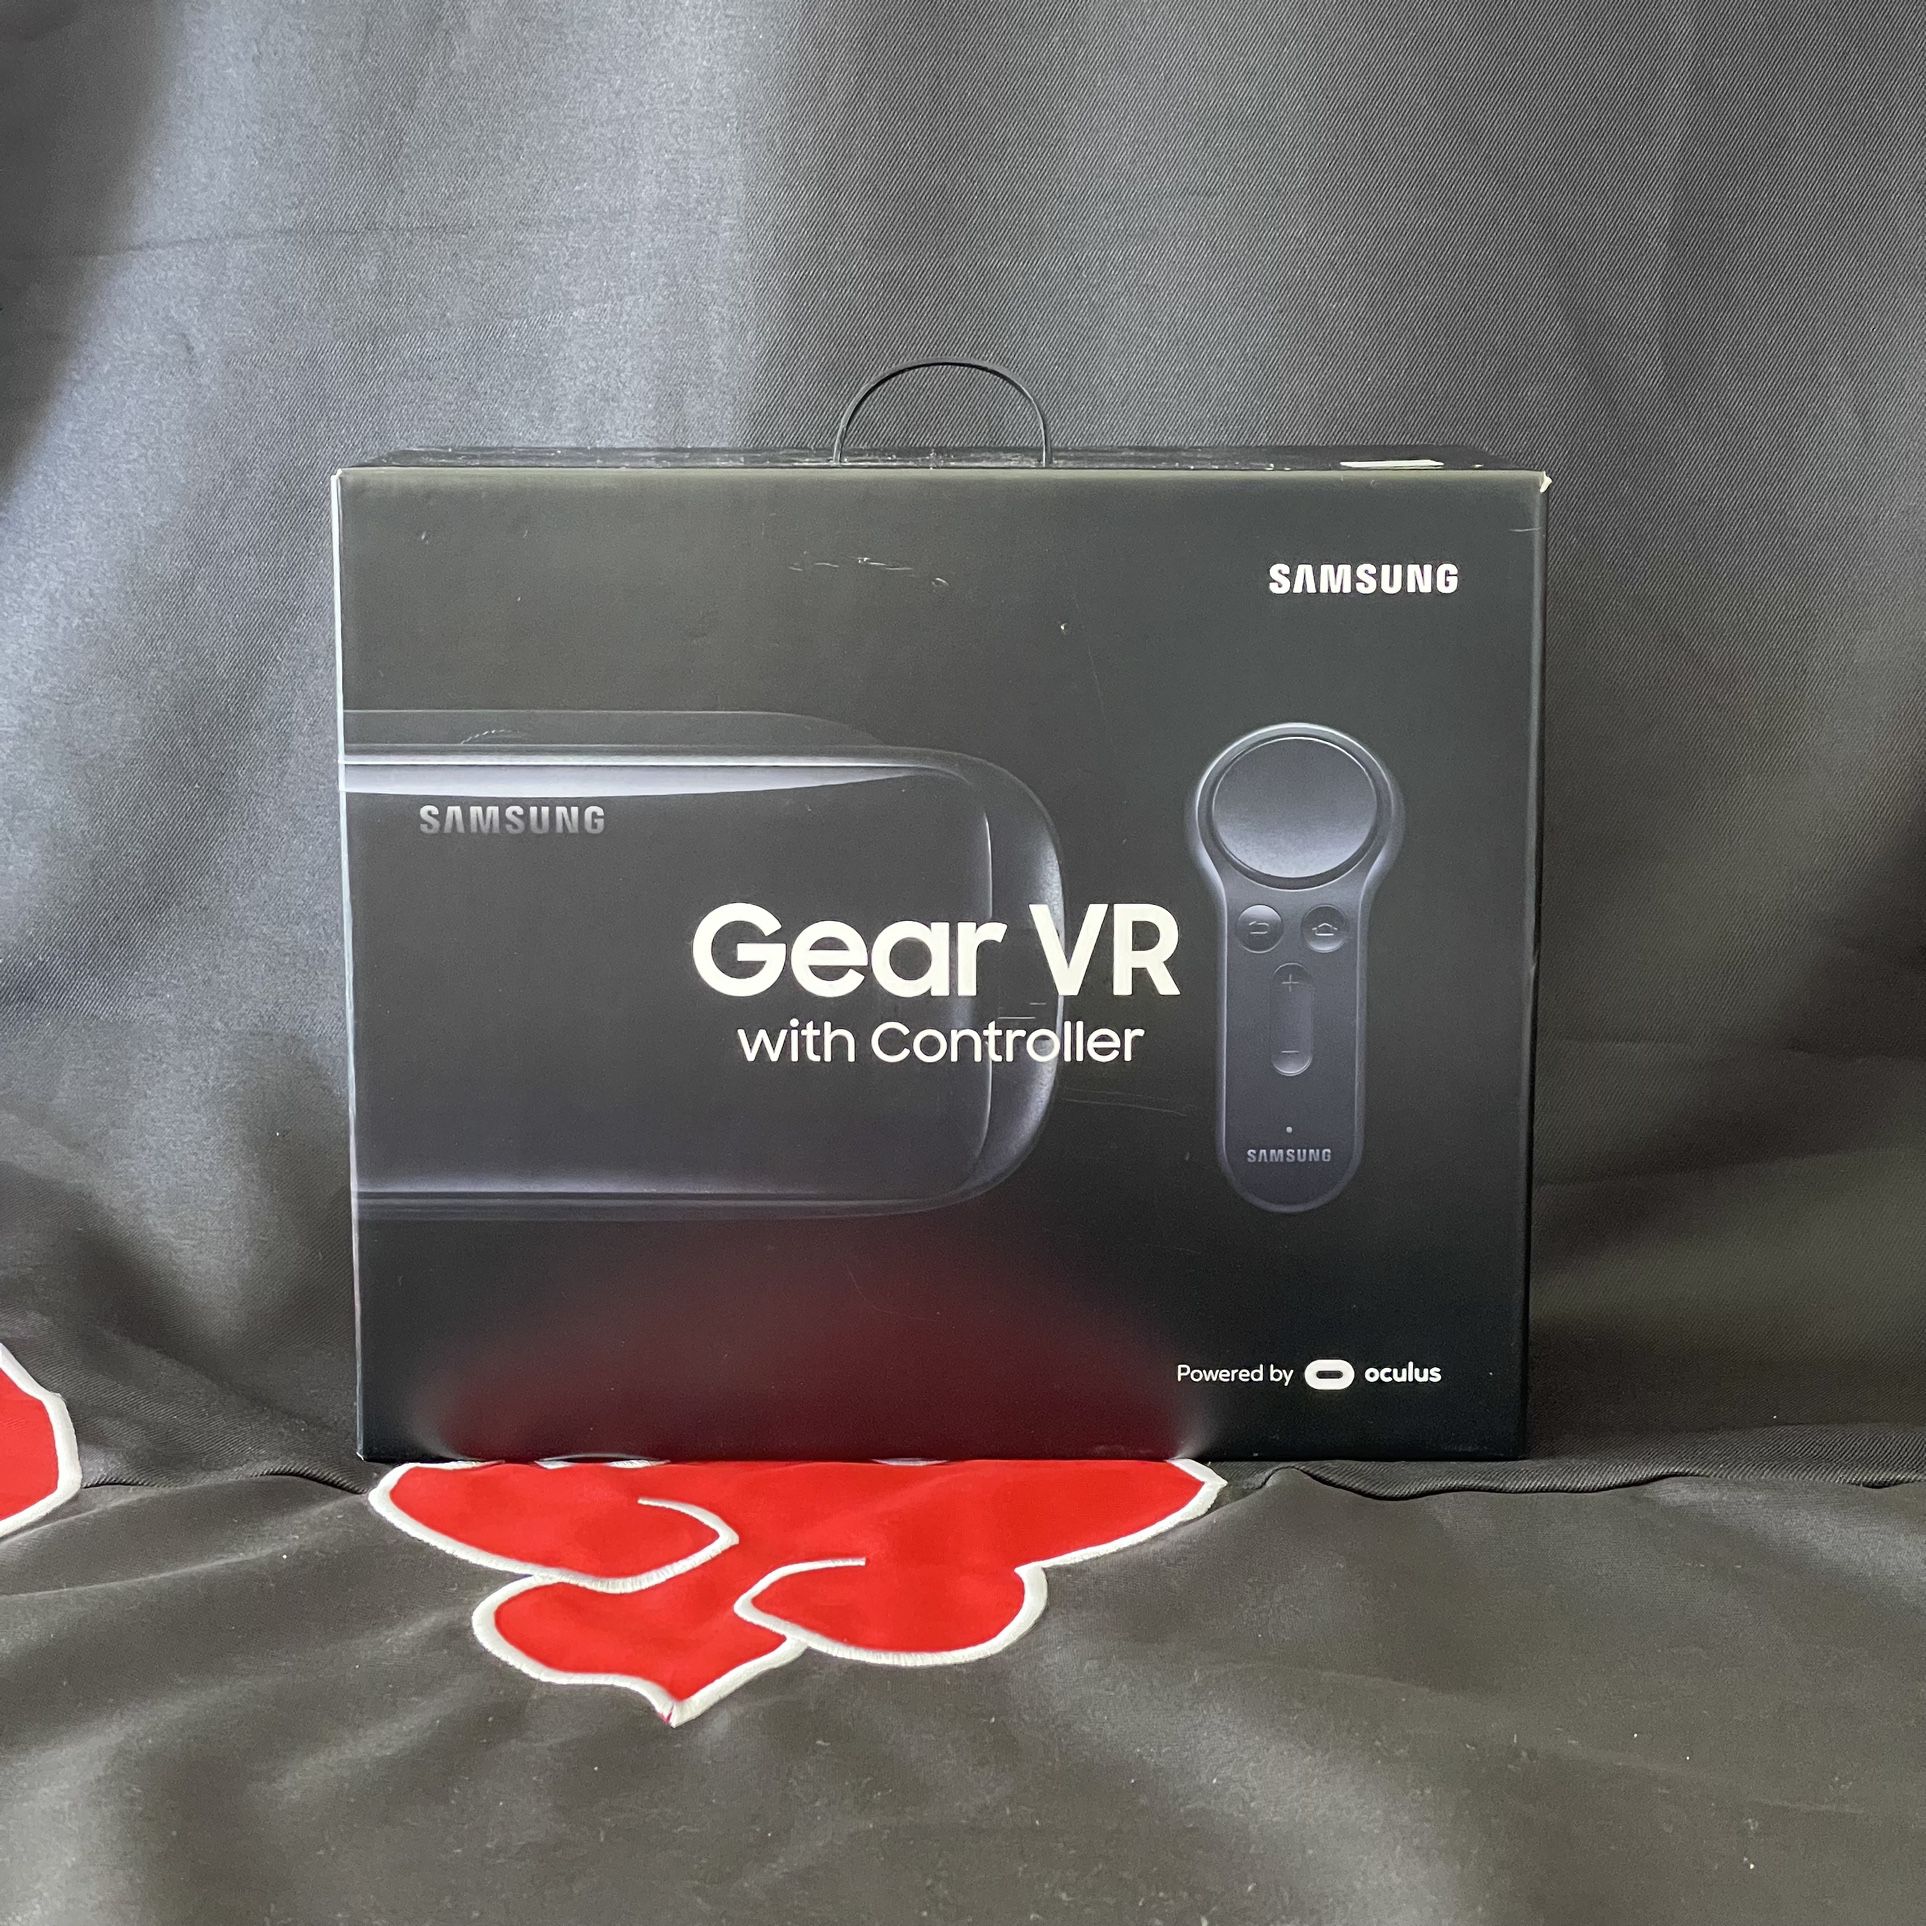 SAMSUNG Gear VR (2017 Edition) with Controller for Galaxy S8